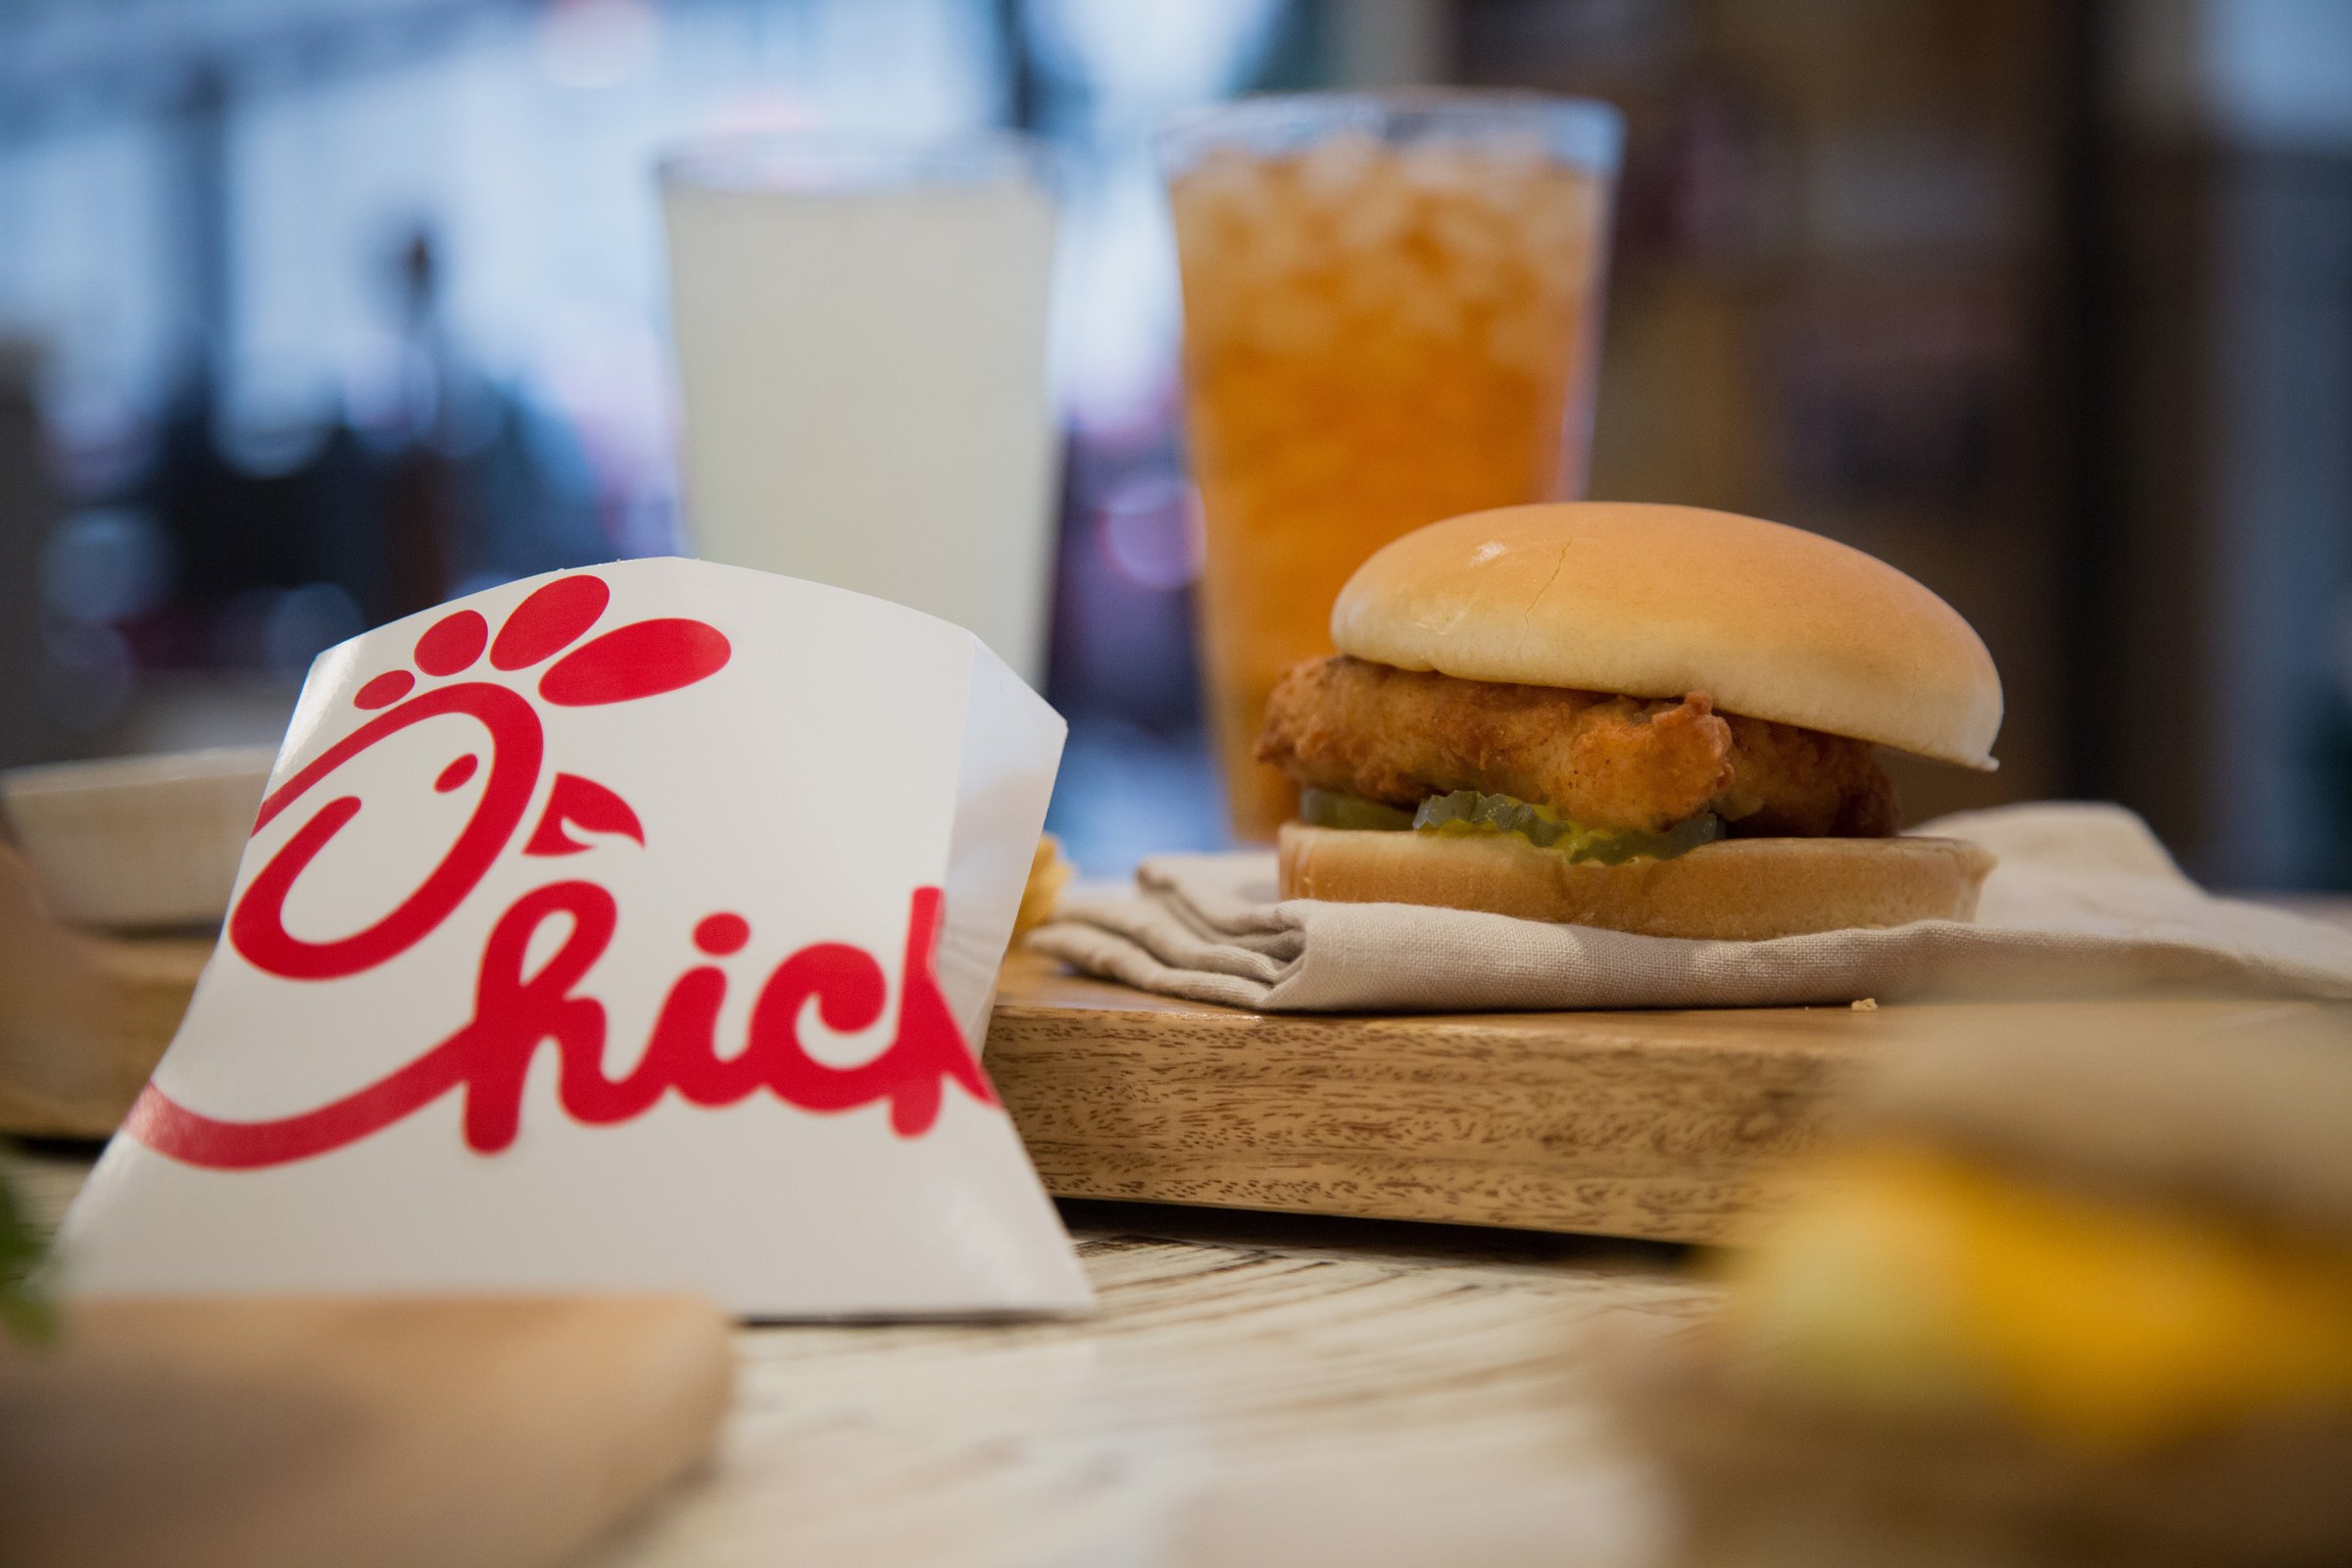 French fries and a fried chicken sandwich are arranged for a photograph during an event ahead of the grand opening for a Chick-fil-A restaurant in New York, U.S., on Friday, Oct. 2, 2015.